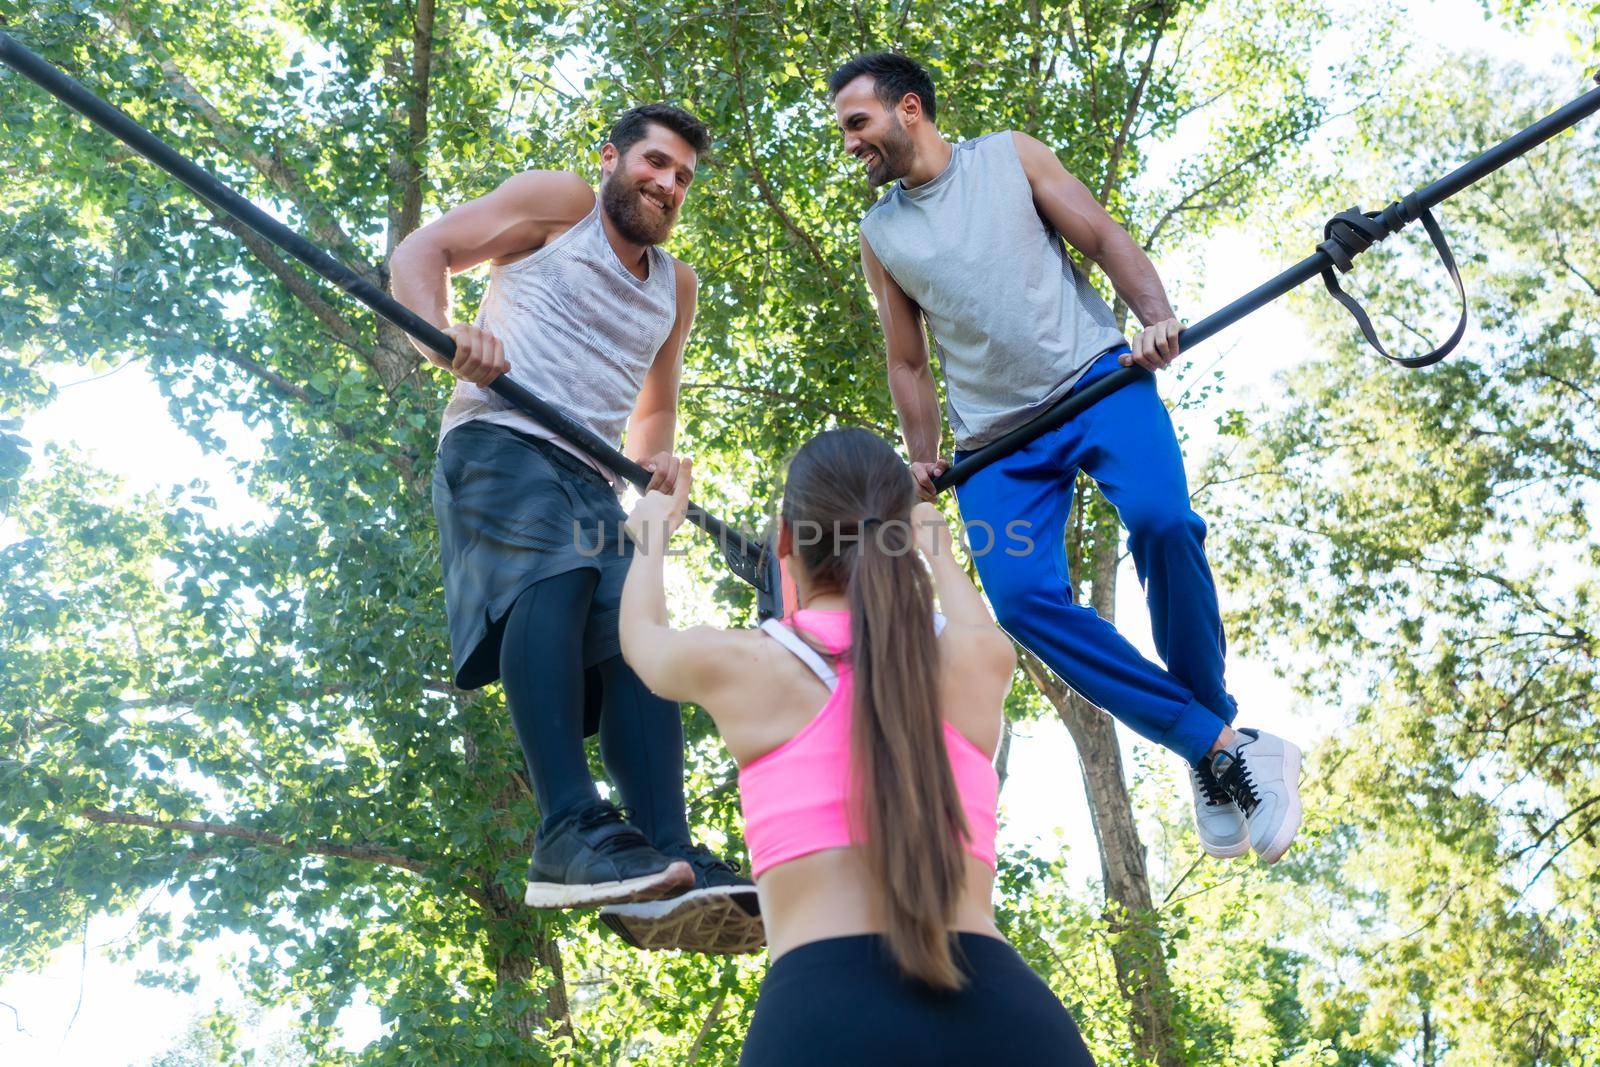 Low-angle rear view of a fit woman showing thumbs up to her two male friends during extreme workout outdoors in a modern calisthenics park